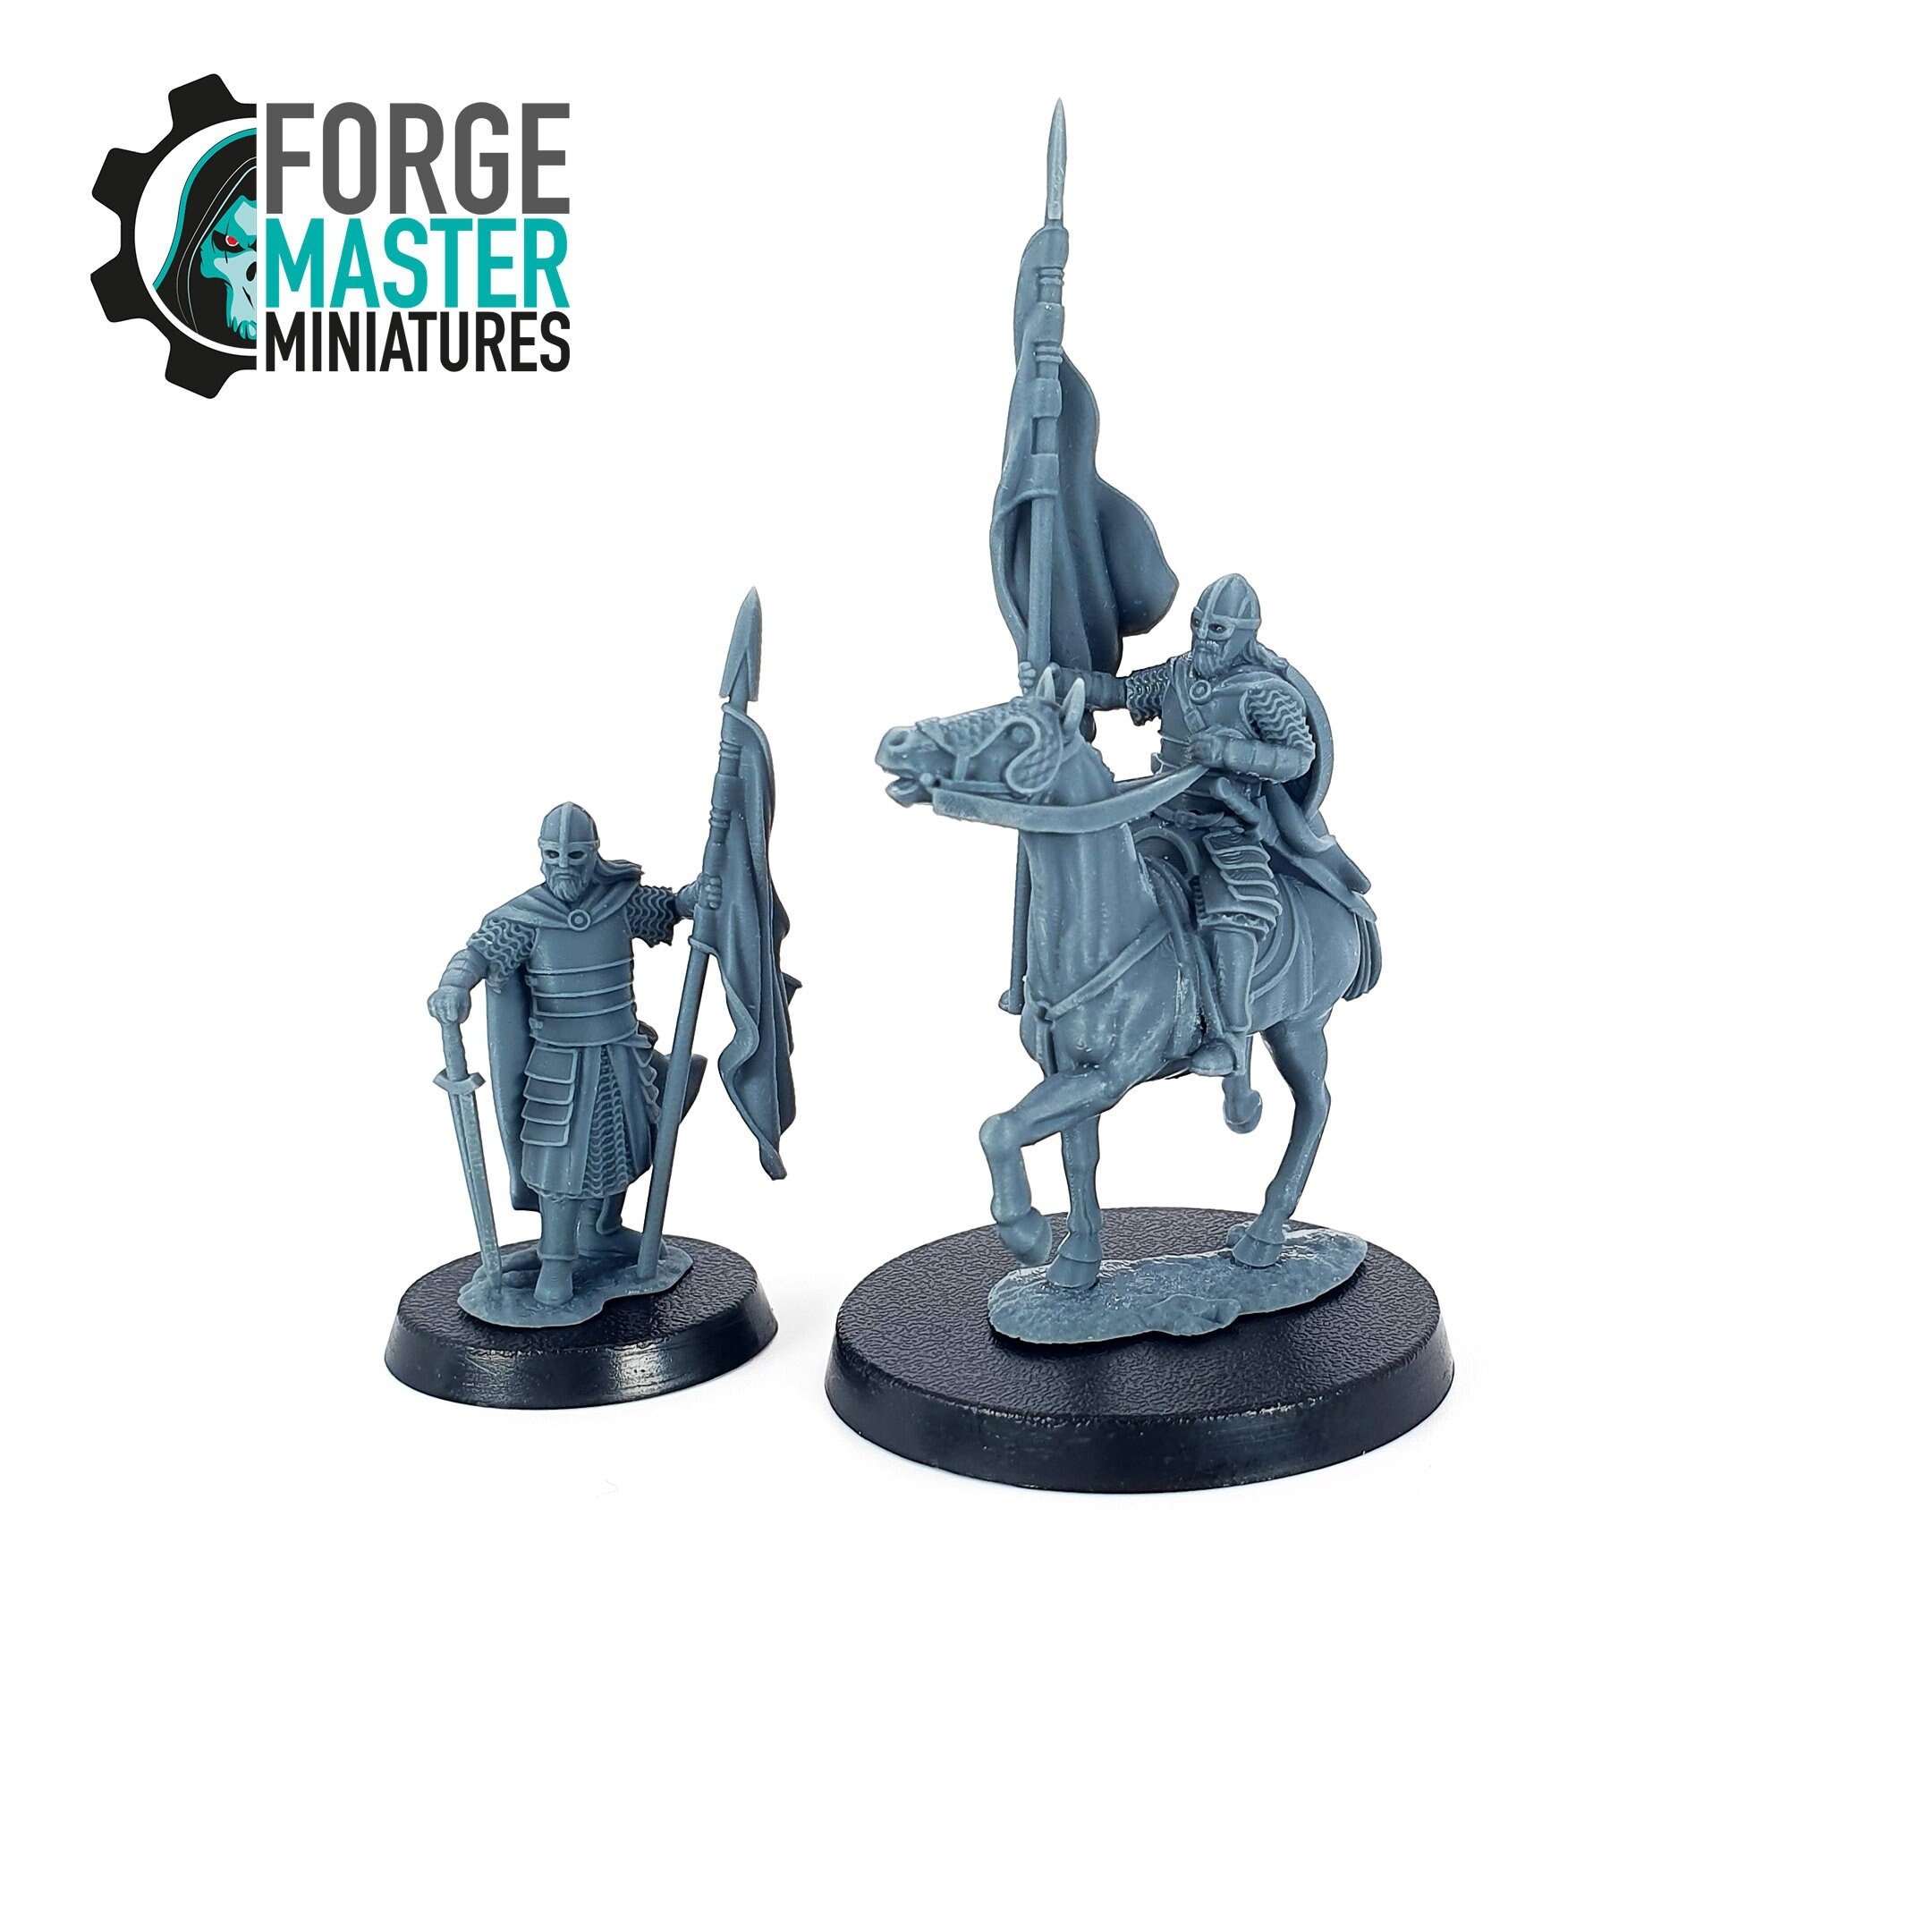 Riders of the West Bannerman wargaming miniatures from the West Humans range by Davale Games 3d Printed by Forgemaster Miniatures